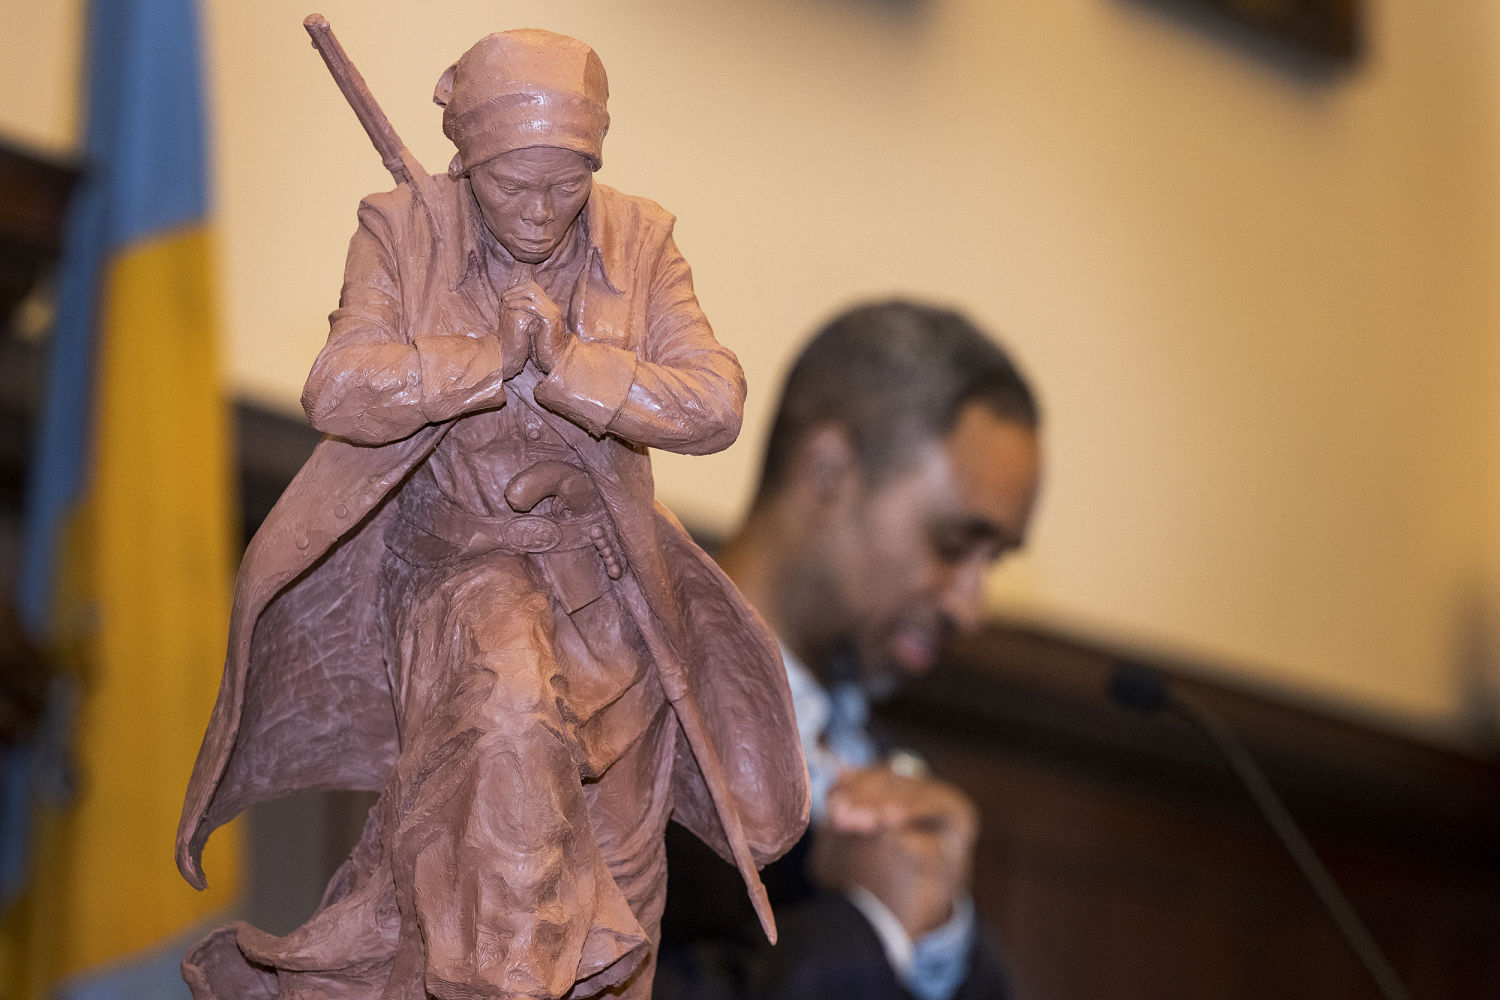 Philadelphia picks winning design for Harriet Tubman statue after controversy over original choice